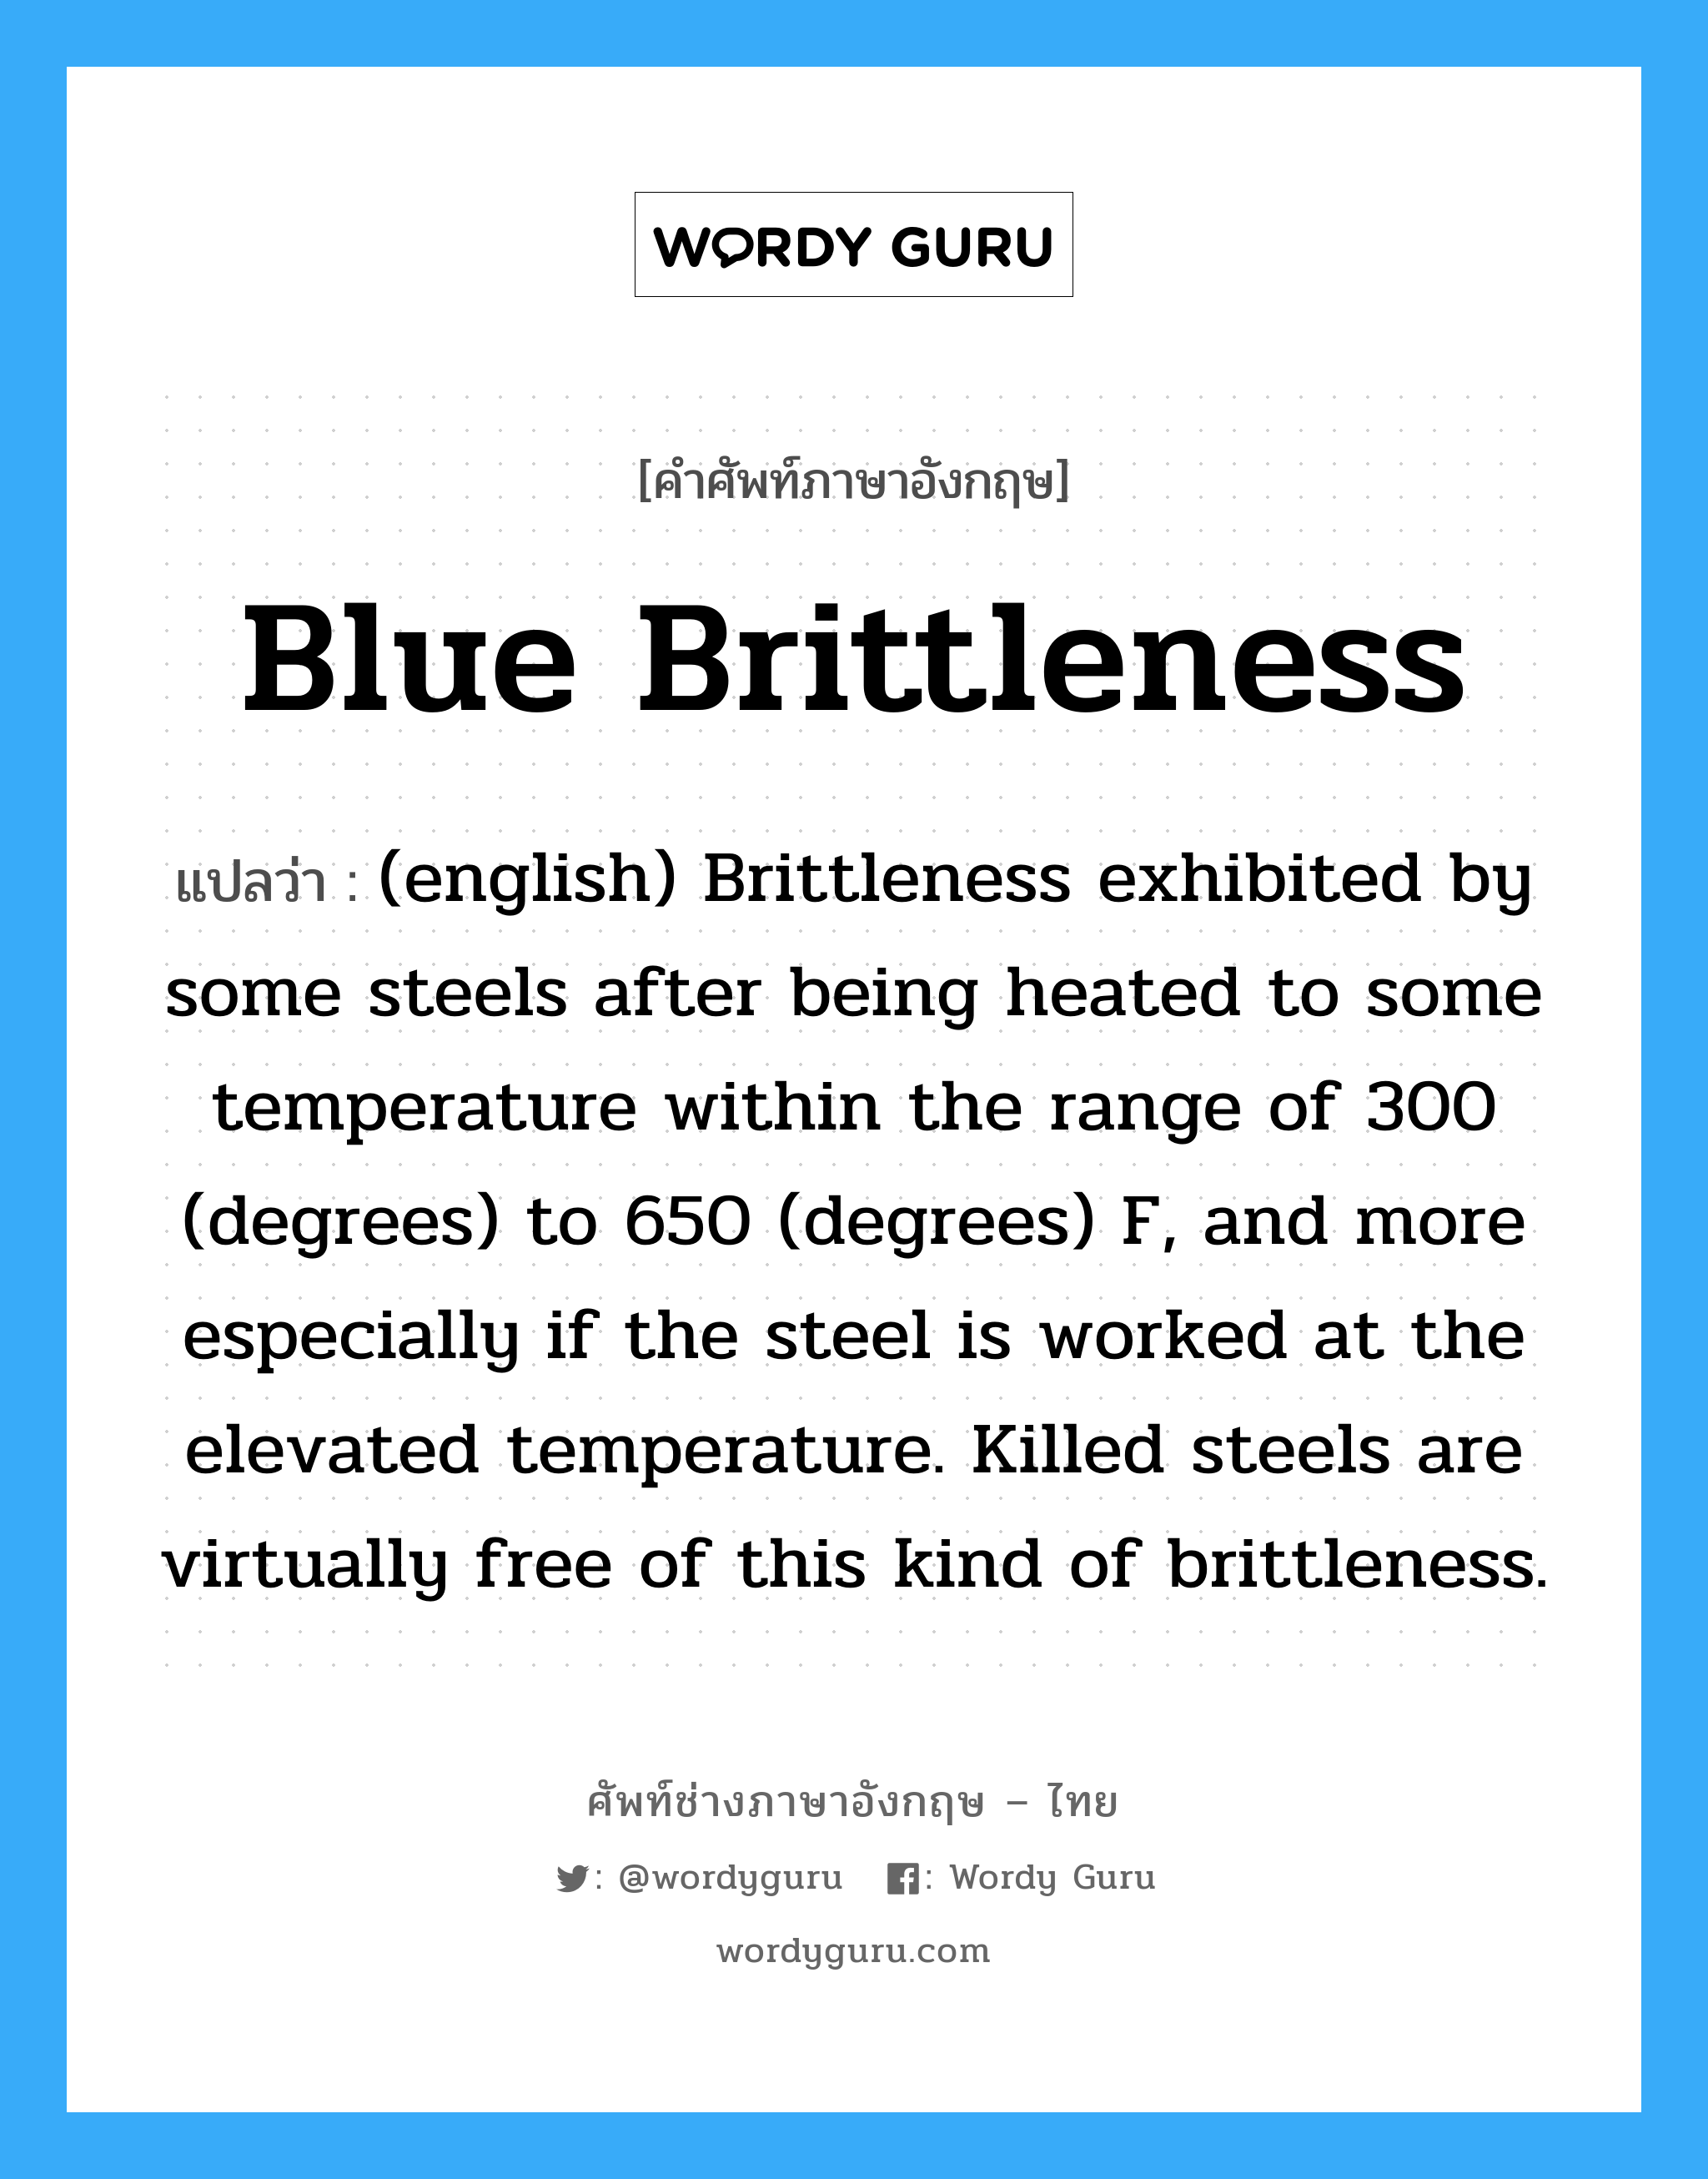 Blue Brittleness แปลว่า?, คำศัพท์ช่างภาษาอังกฤษ - ไทย Blue Brittleness คำศัพท์ภาษาอังกฤษ Blue Brittleness แปลว่า (english) Brittleness exhibited by some steels after being heated to some temperature within the range of 300 (degrees) to 650 (degrees) F, and more especially if the steel is worked at the elevated temperature. Killed steels are virtually free of this kind of brittleness.